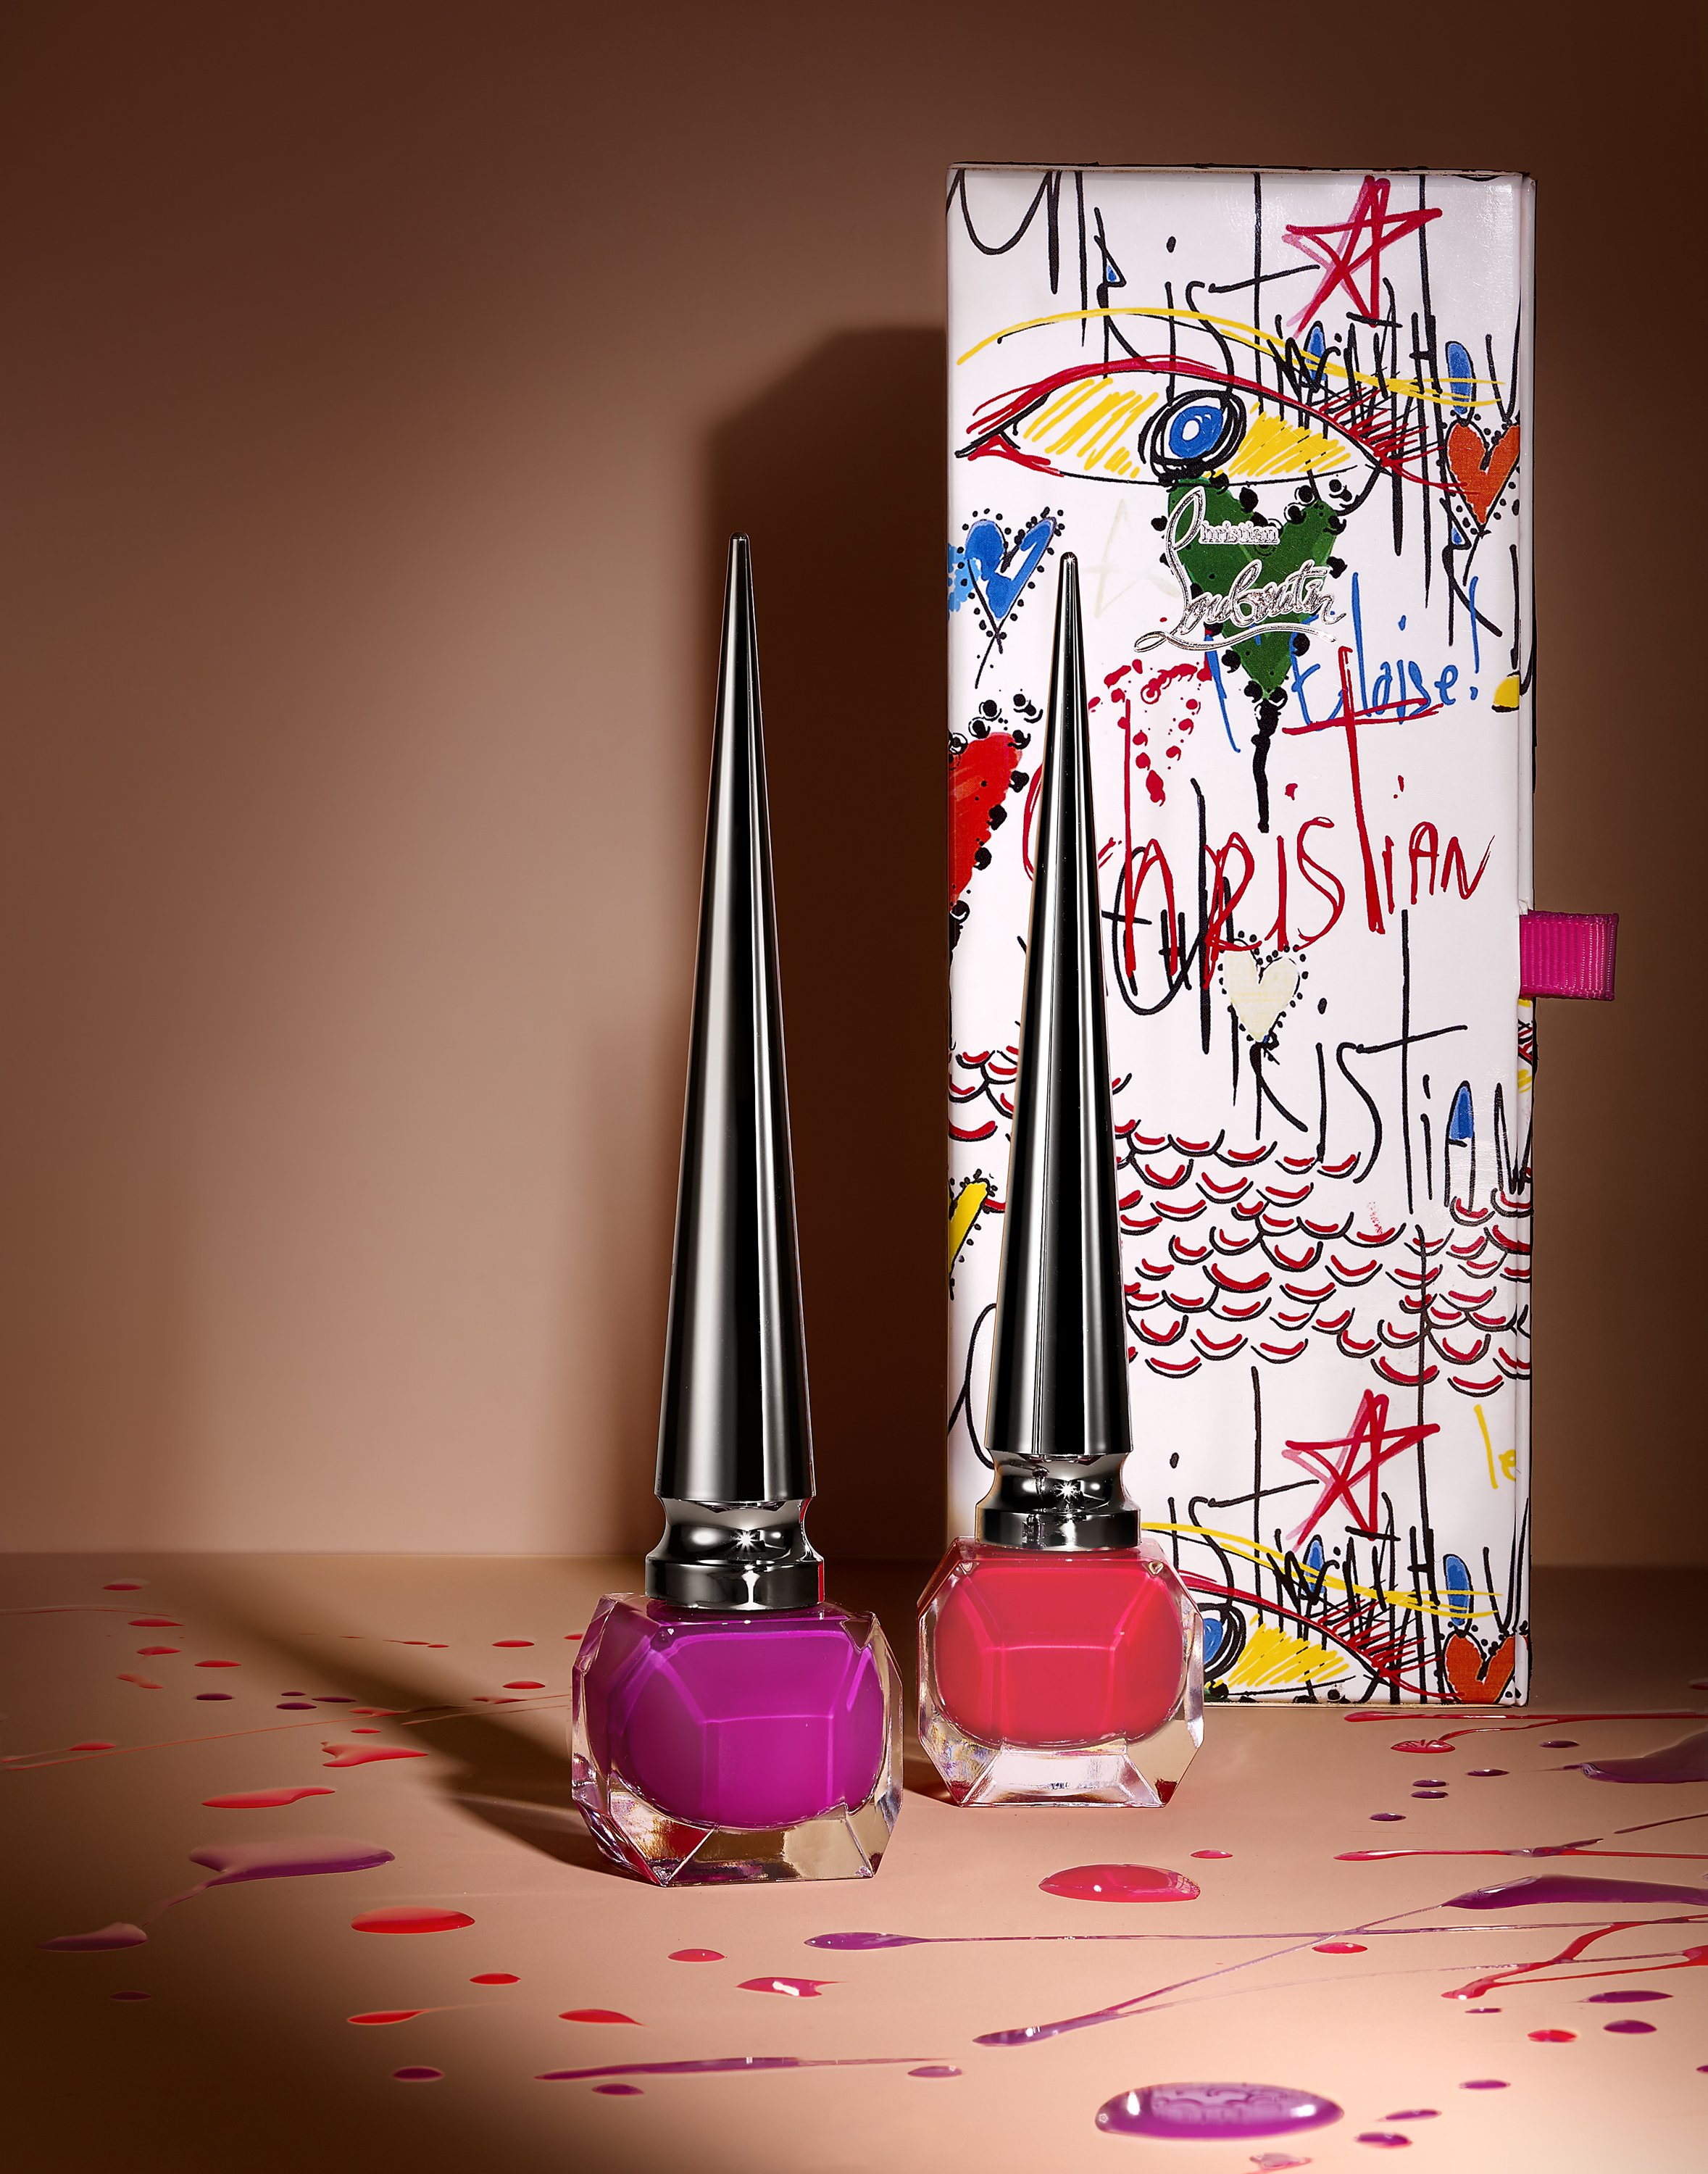 Christian Louboutin auf Twitter: "Pick your poision. Inspired by Christian Louboutin's Loubitag collection, Louboutin Beaute introduces three limited edition Nail Colour duos featuring Pluminette and Miss Loubi and Bolidonna, or Edgypopi